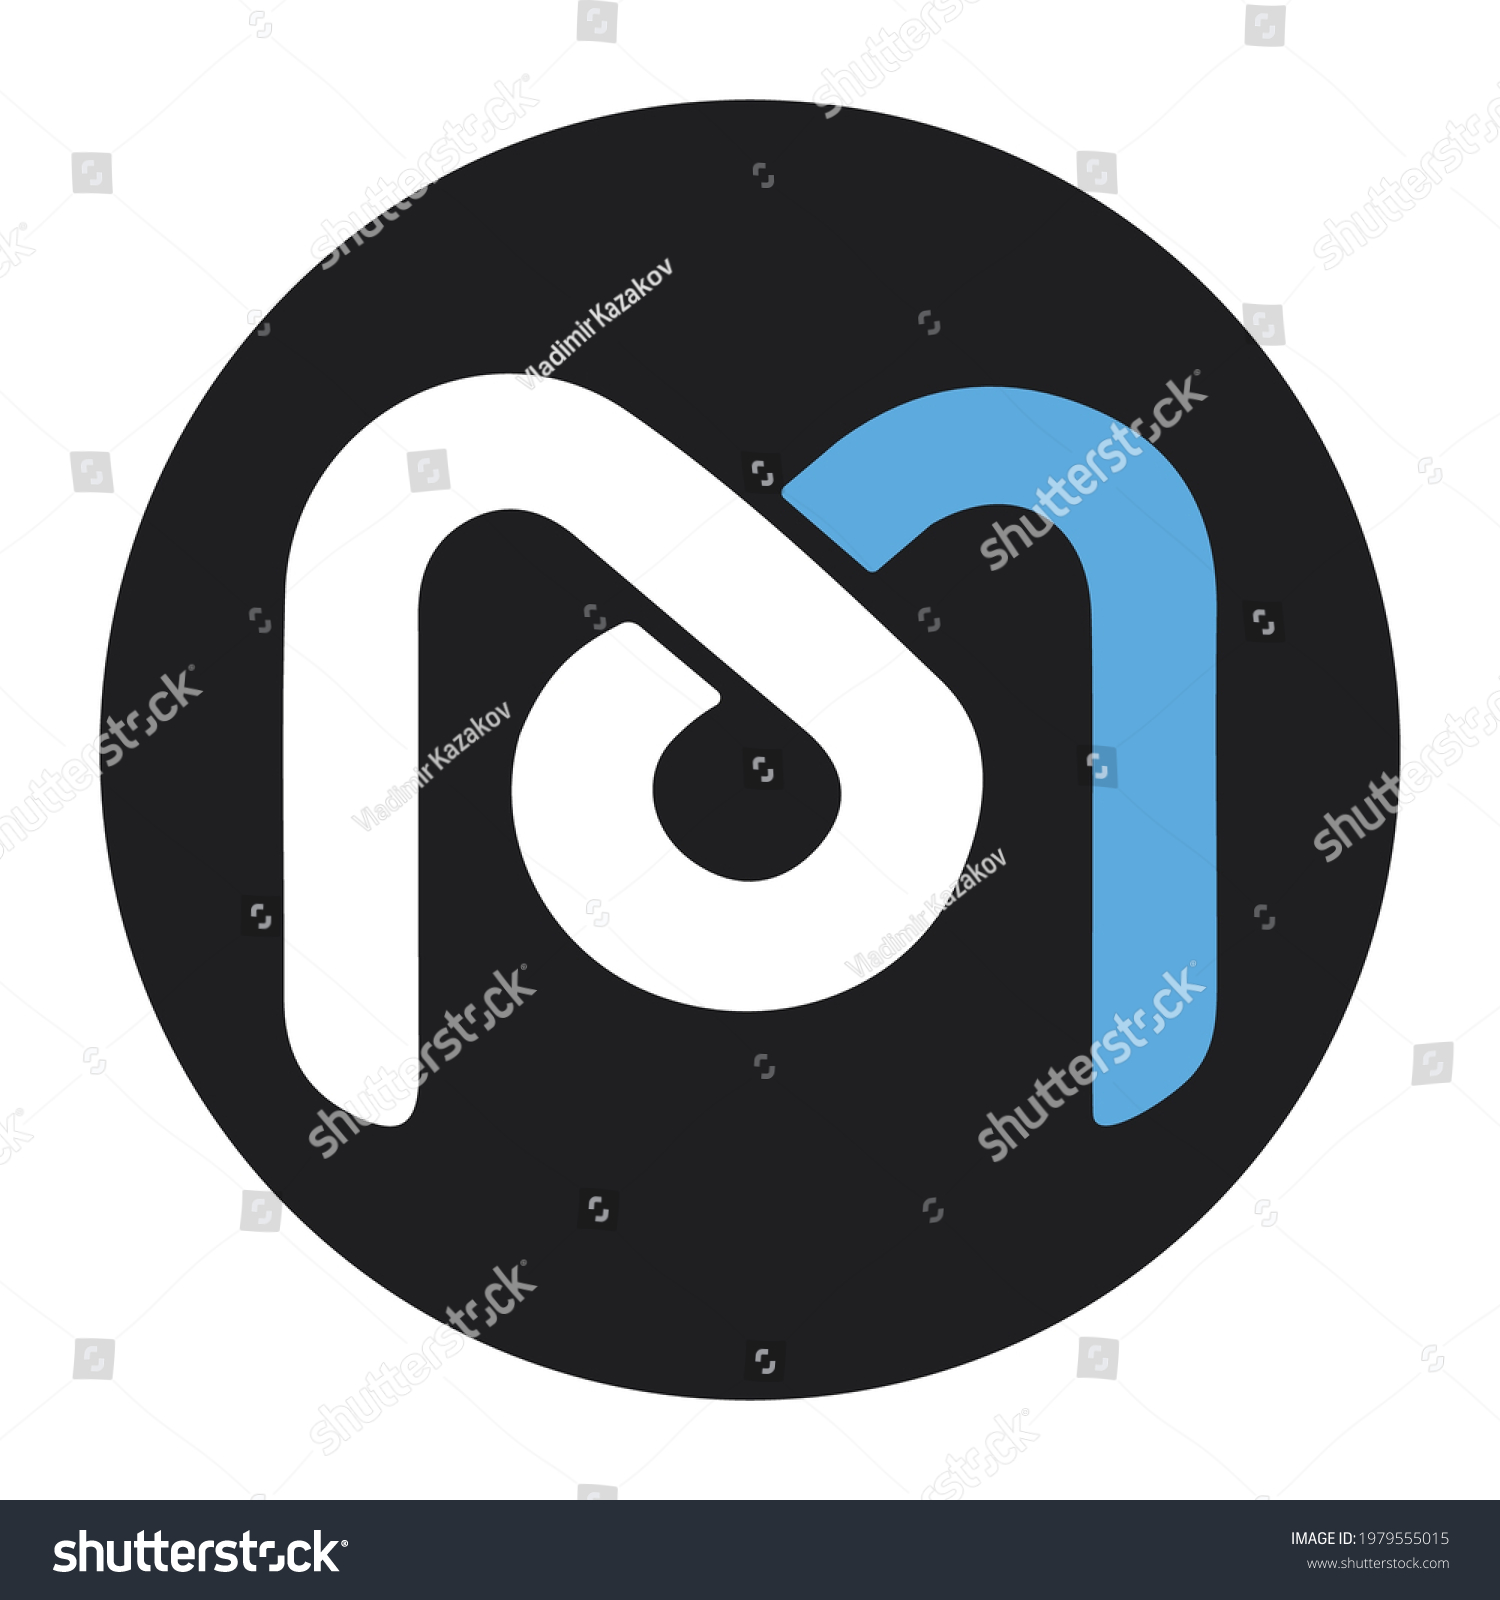 SVG of Mdex MDX token new symbol of the DeFi project cryptocurrency logo, decentralized finance coin icon isolated on white background. Vector illustration. svg